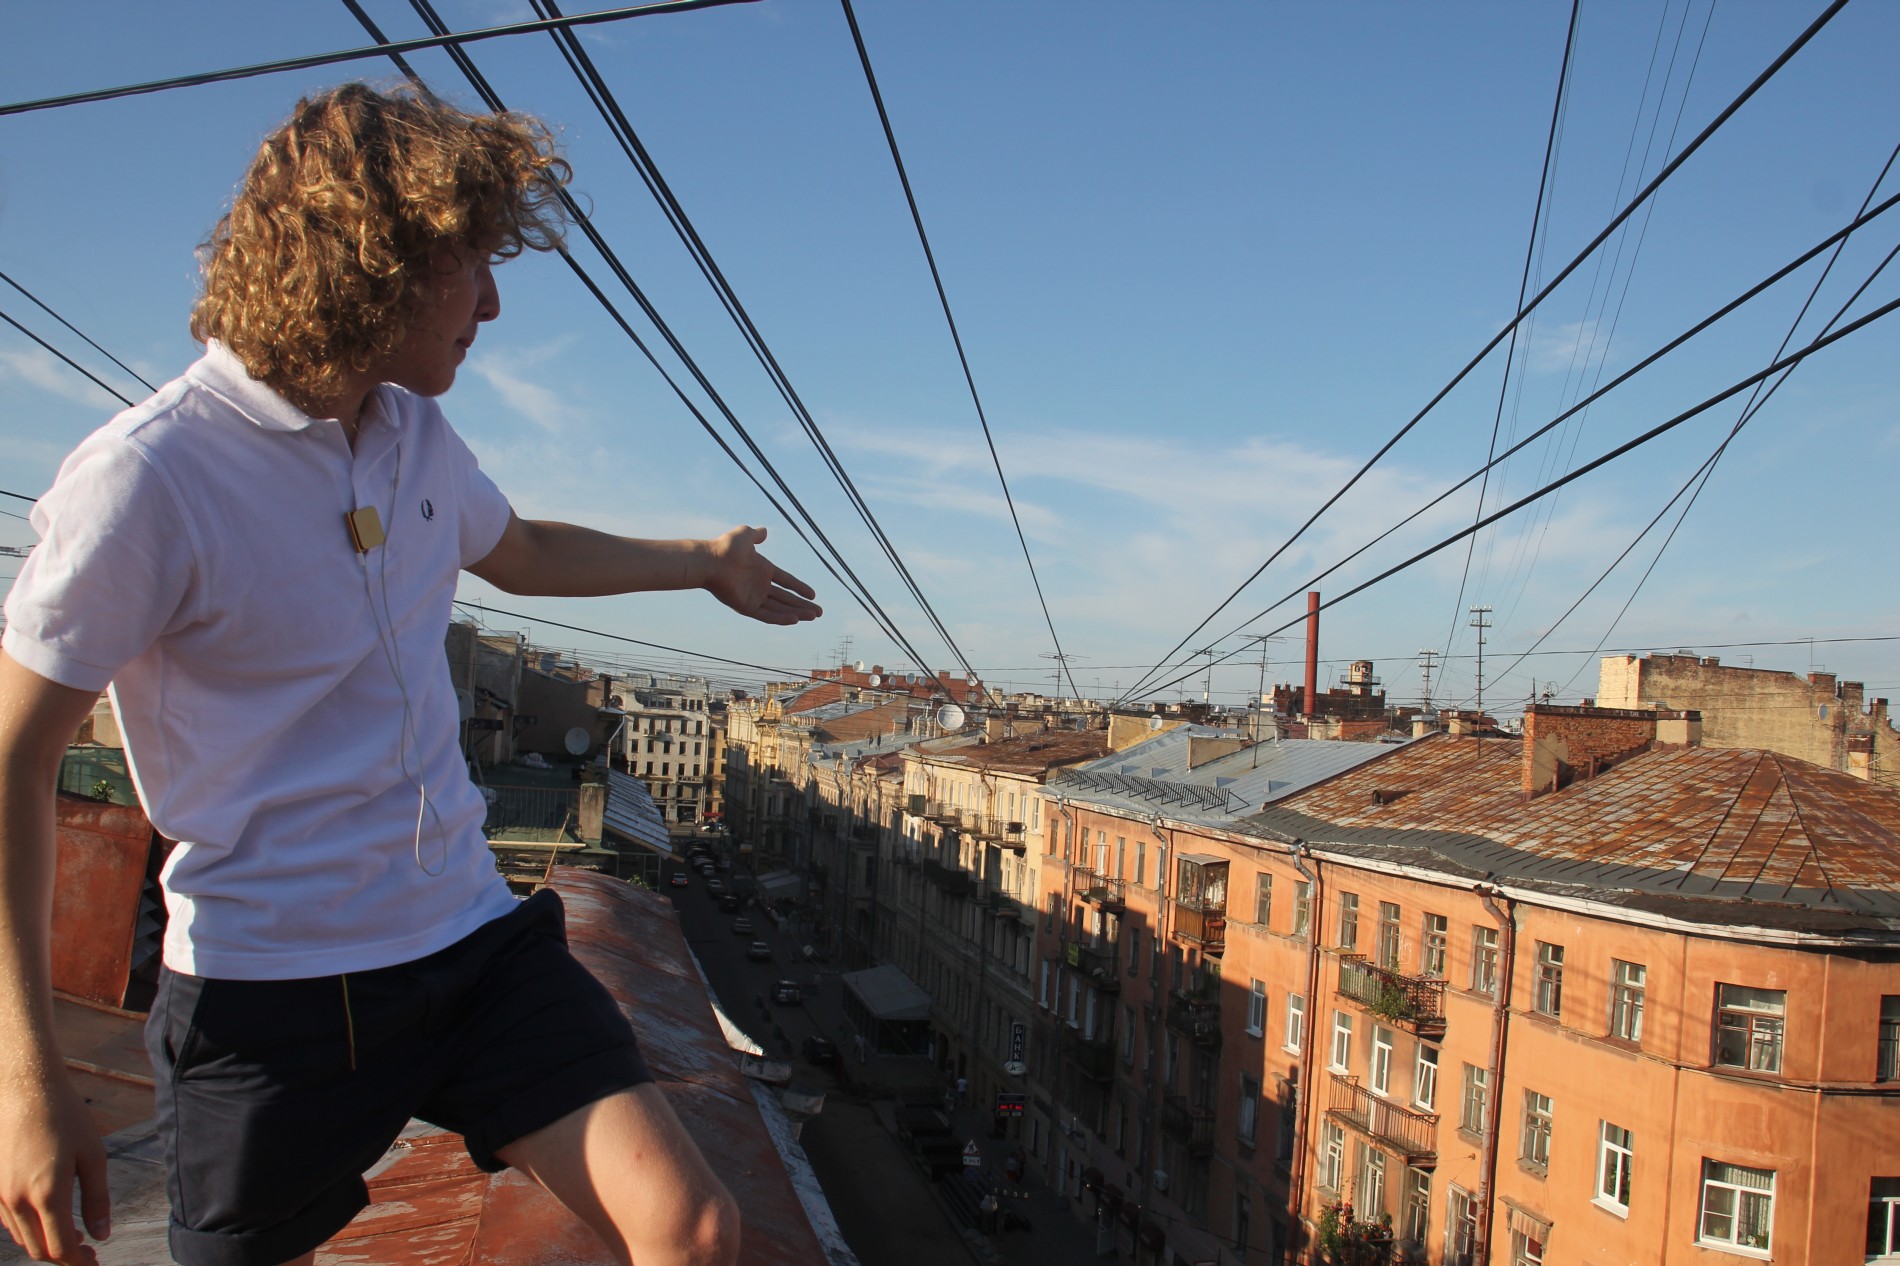 Tour guide Seva describes the view from a rooftop in St. Petersburg, Russia.